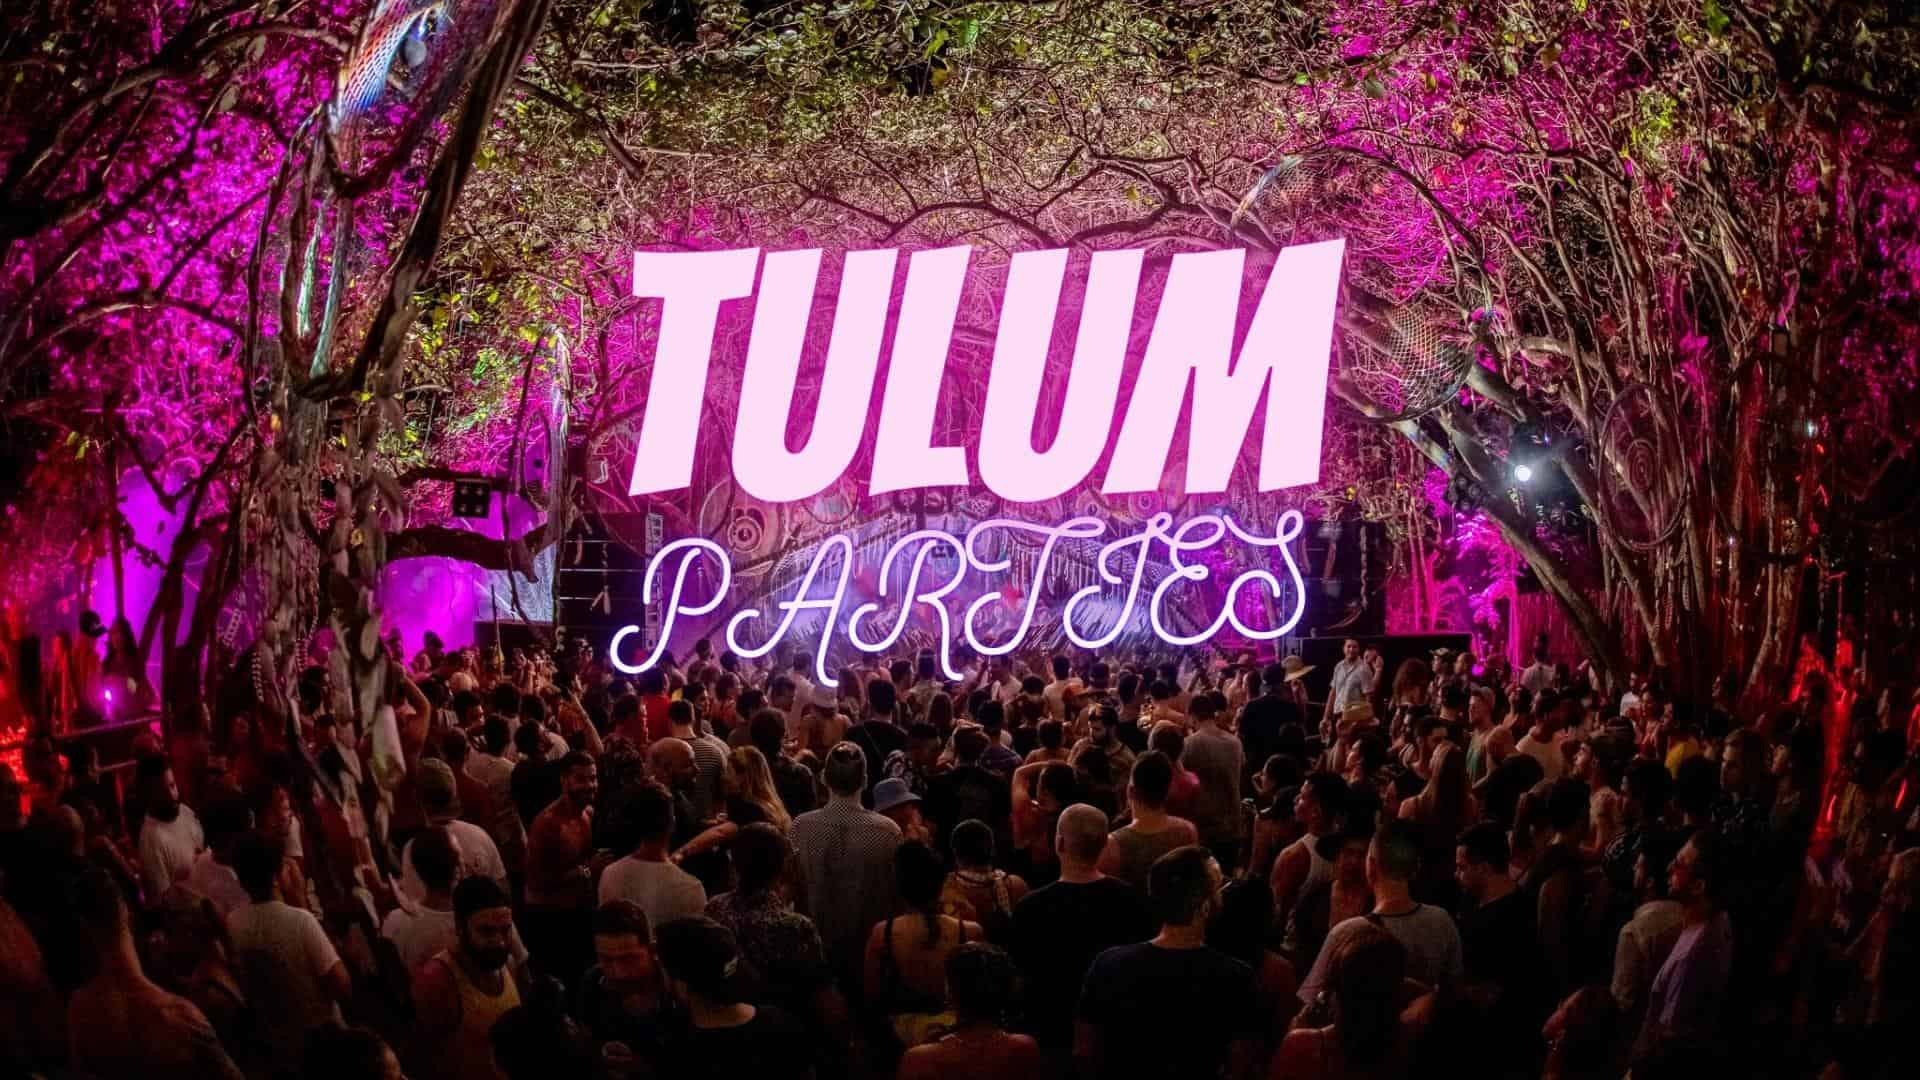 Tulum Techno Parties: The Tropical Electronic Beats